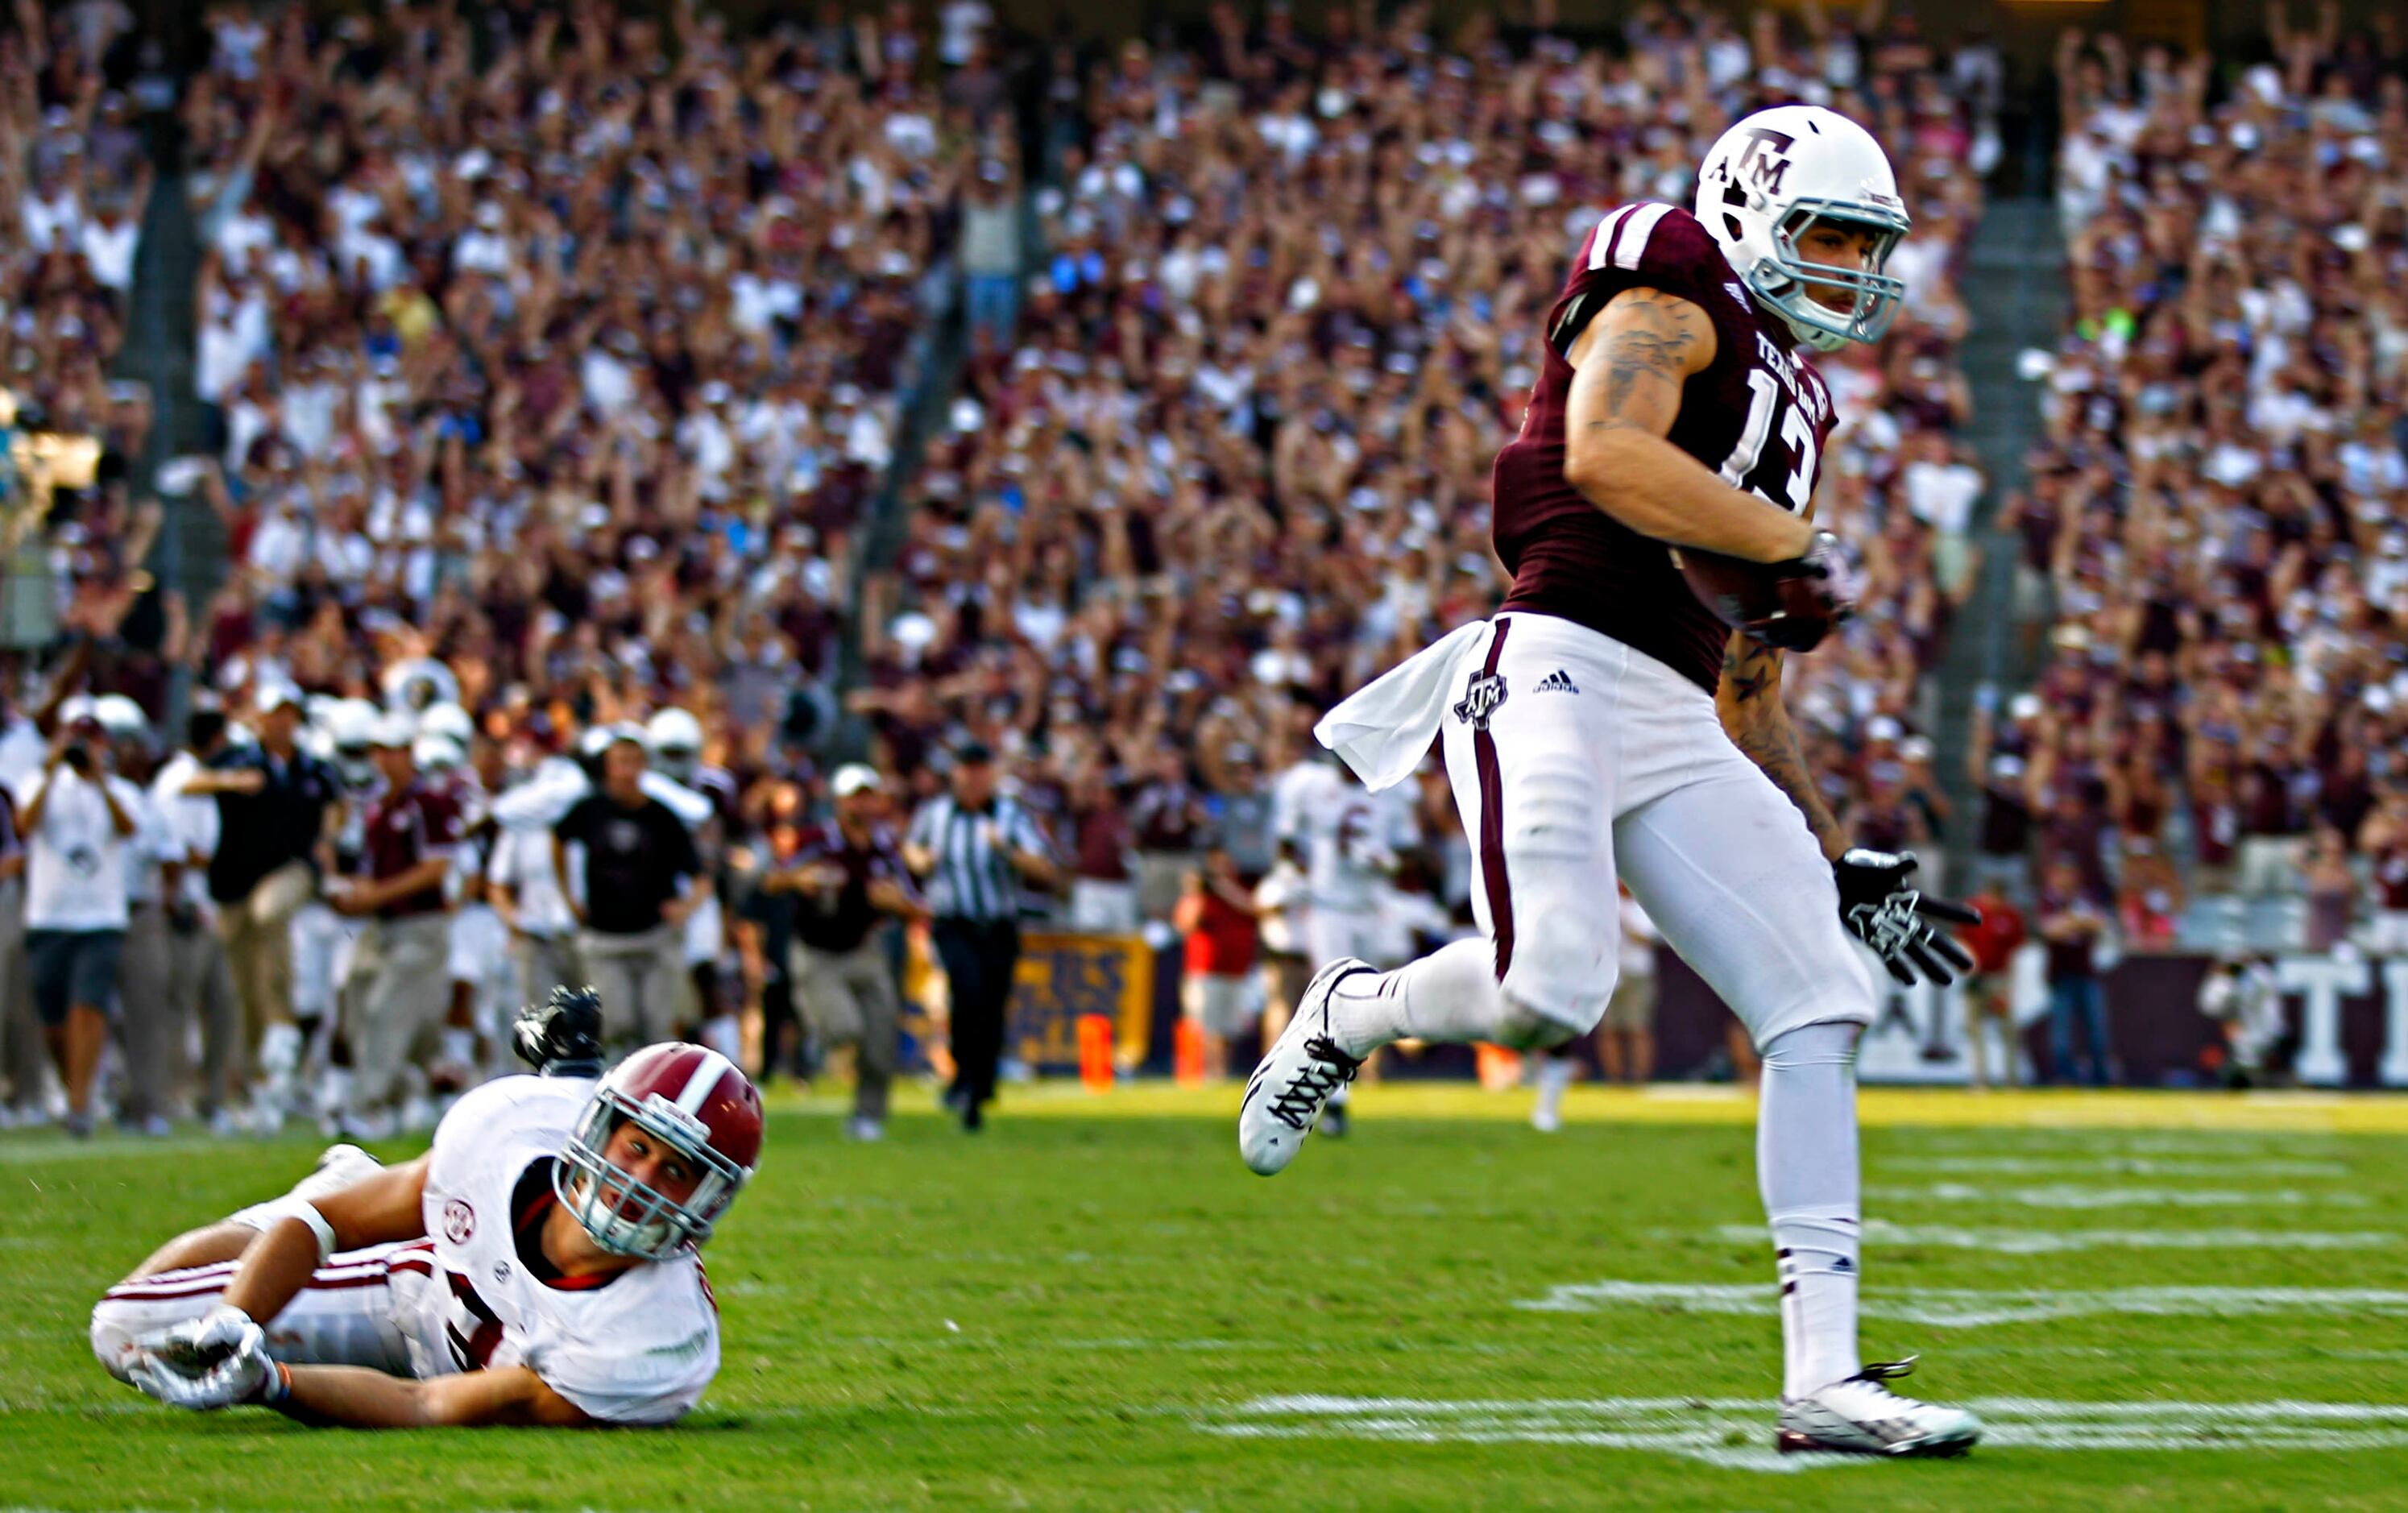 Hairopoulos: Tall and talented, Aggies' Mike Evans is Johnny